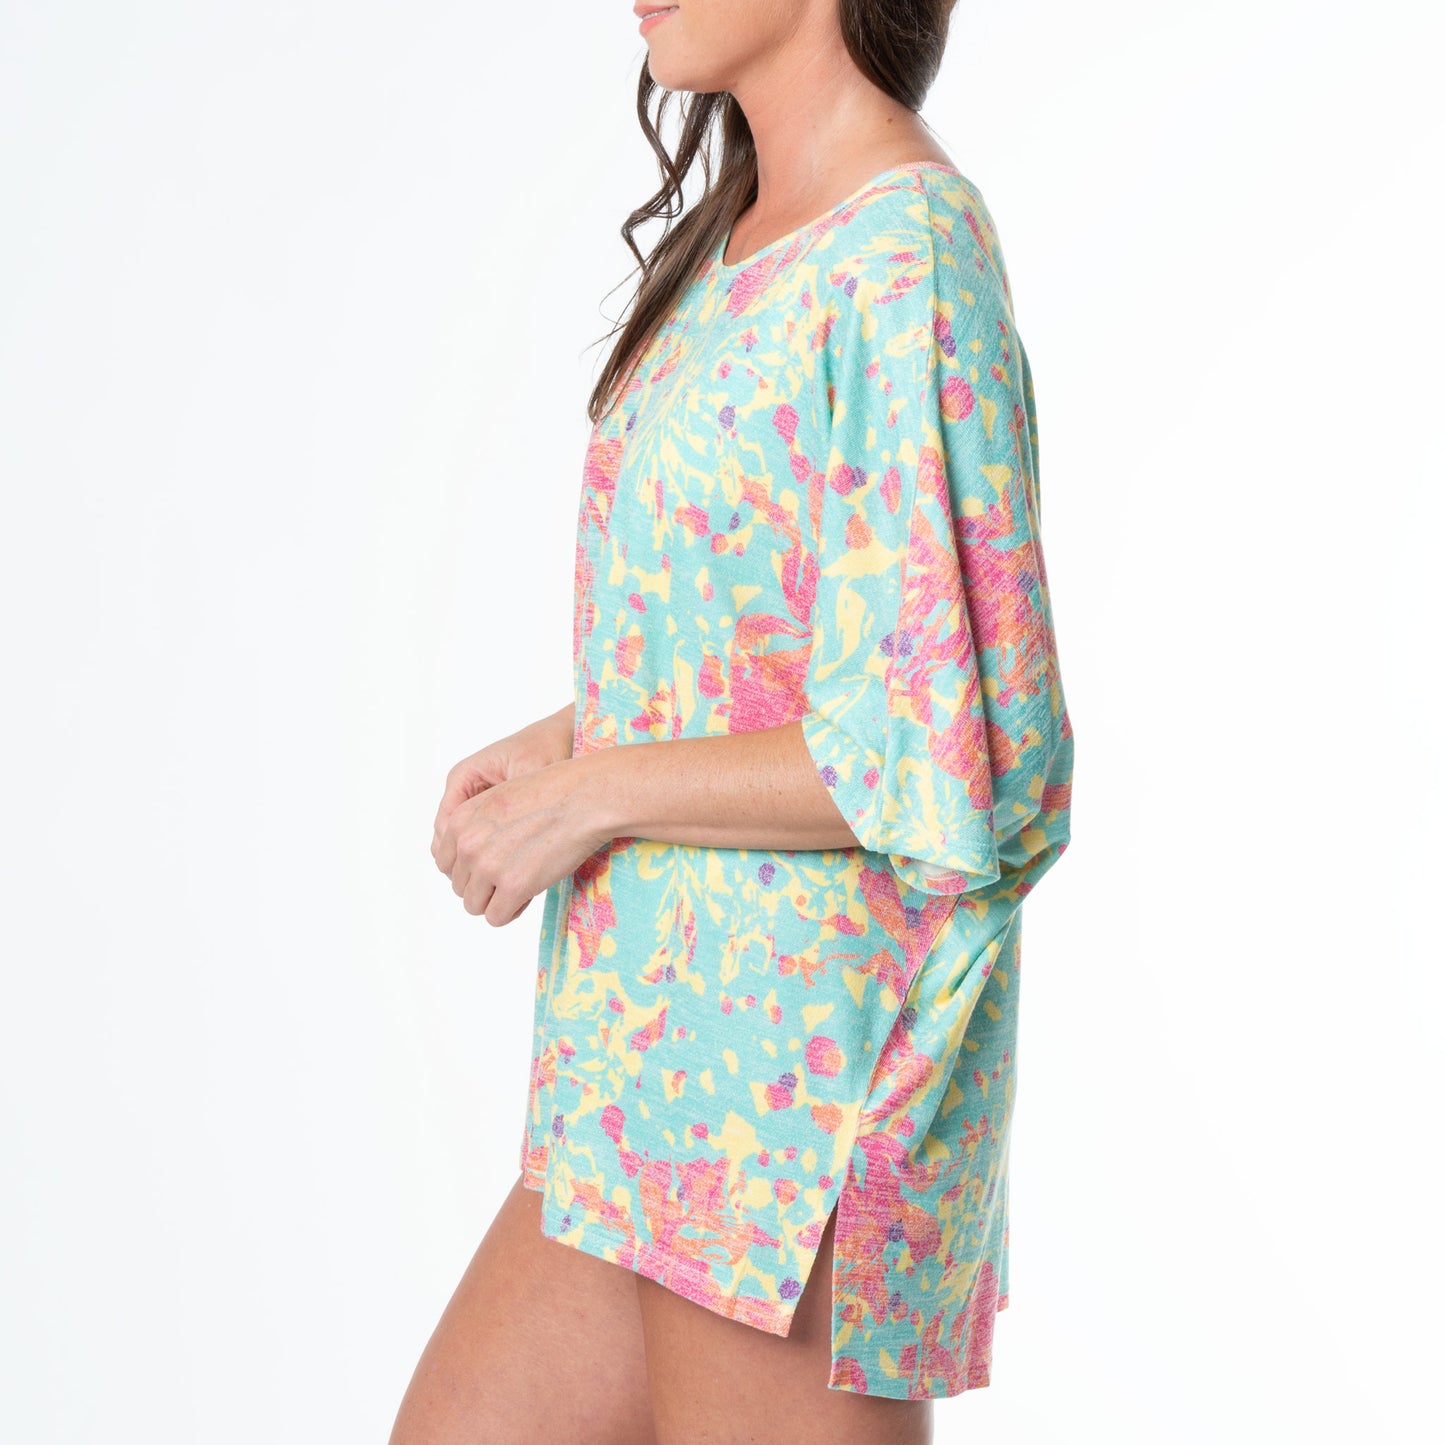 Elsie One Size Swimsuit Cover Up